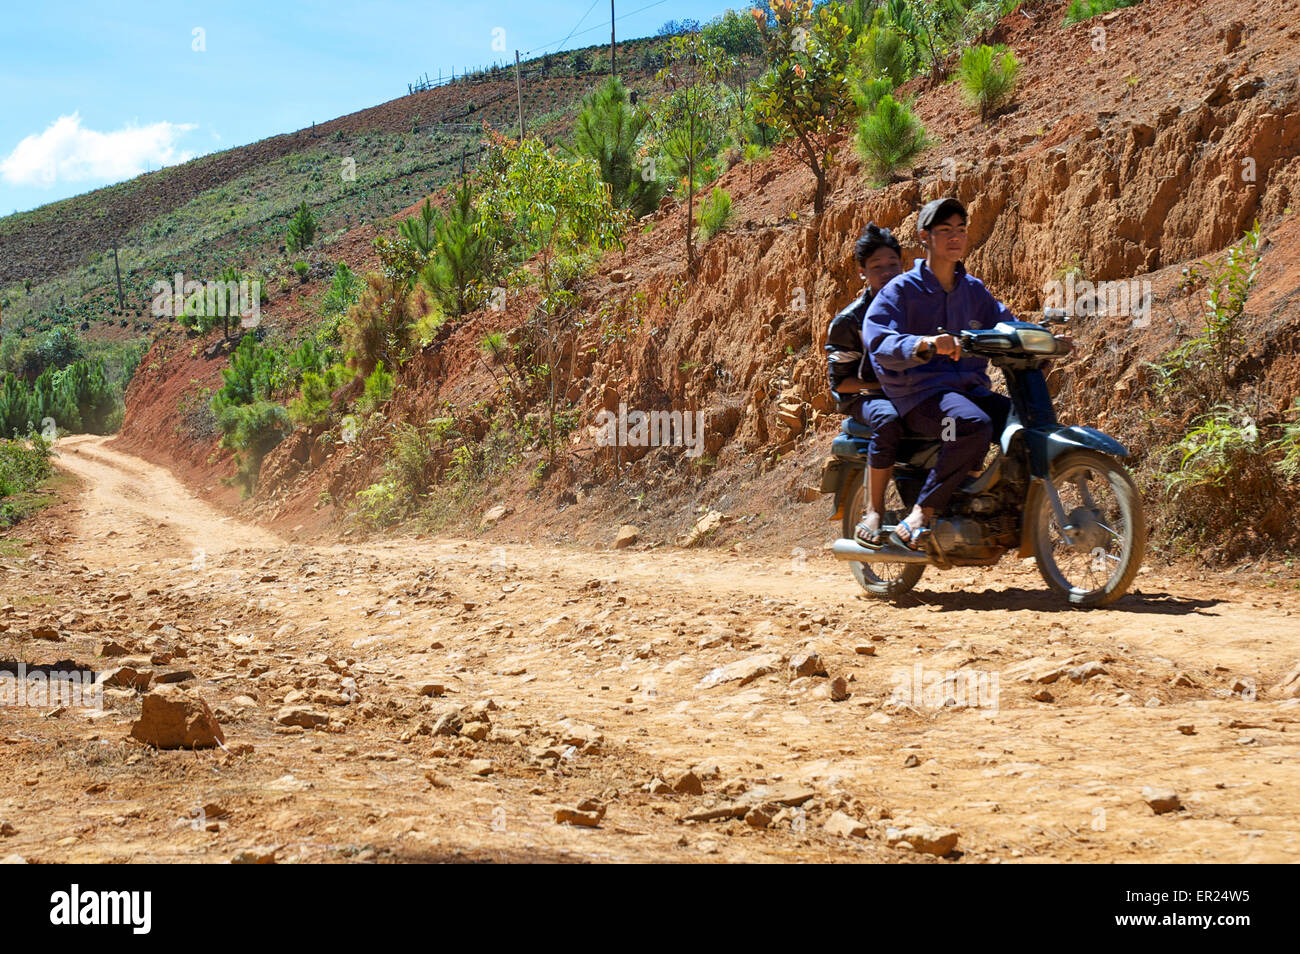 Two people on a motorcycle travel along a dirt road through a coffee plantation in central Vietnam. Stock Photo